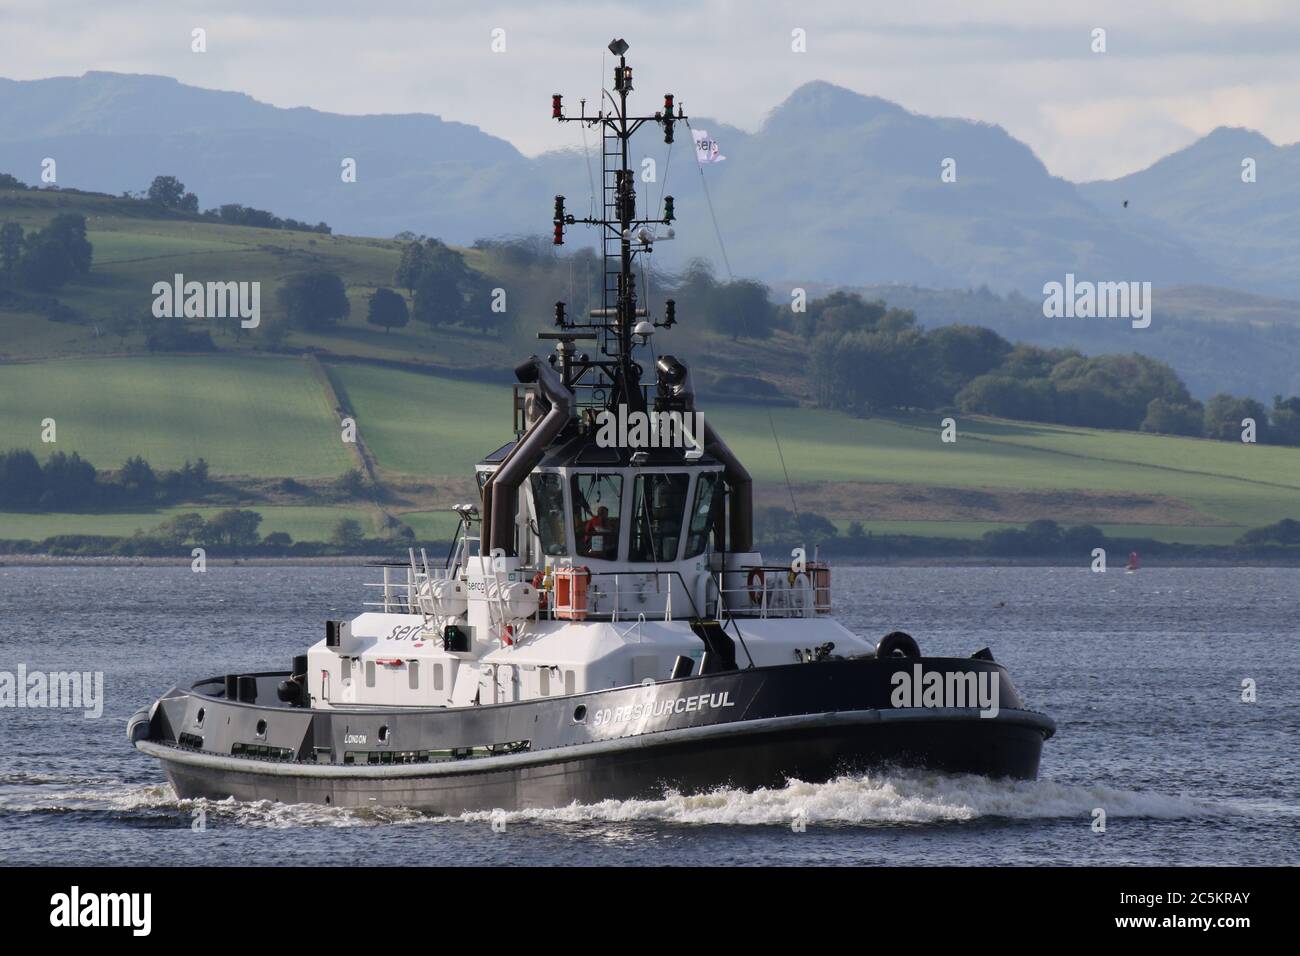 SD Resourceful, an ATD 2909-class tug operated by Serco Marine Services, passes East India Harbour in Greenock. Stock Photo